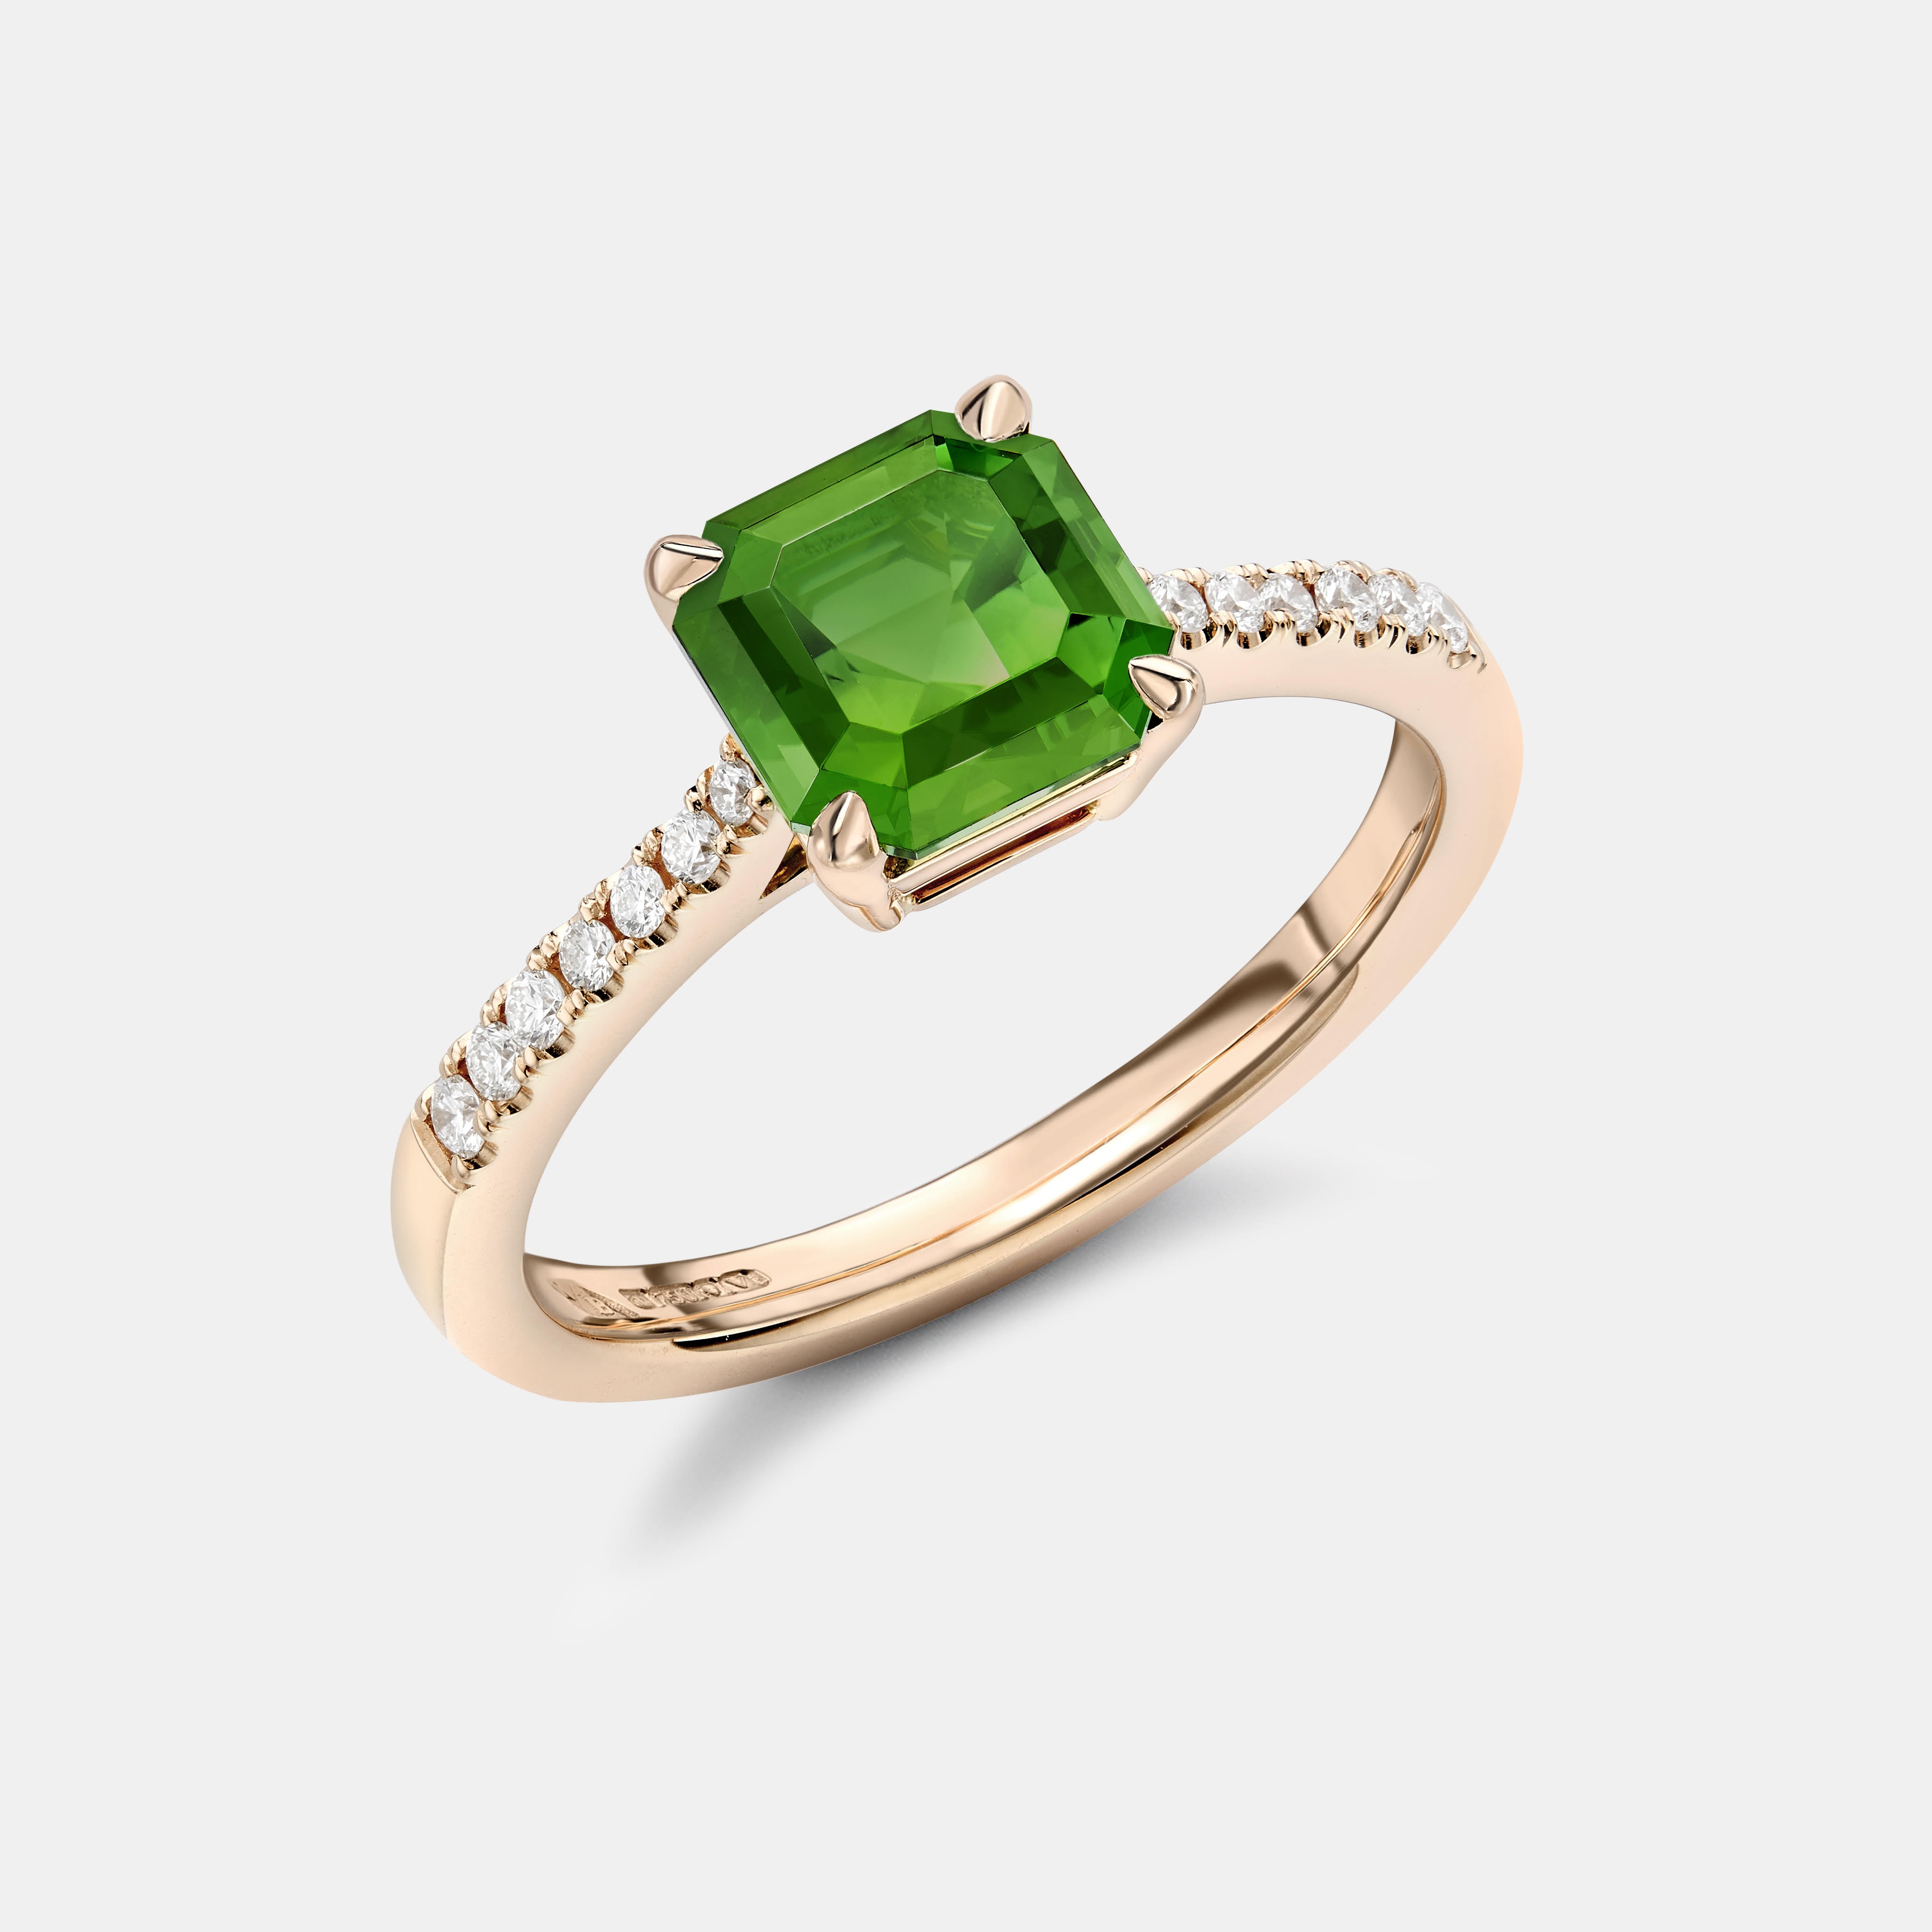 The Rose Gold and Dark Green Tourmaline Ring